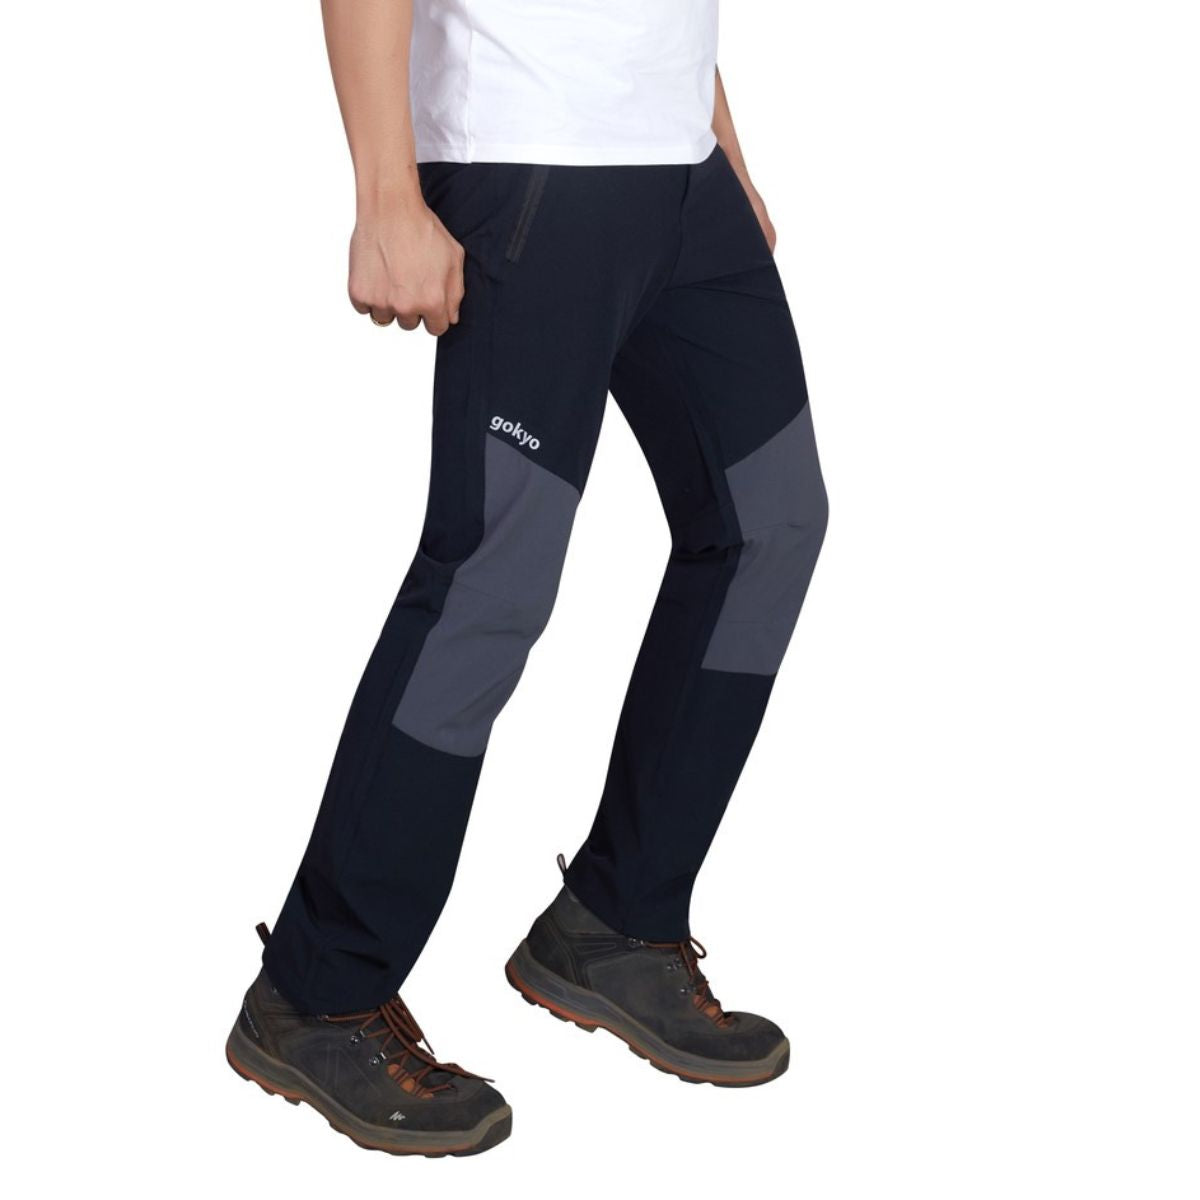 Men's Winter Hiking Pants - Mountainotes LCC Outdoors and Fitness